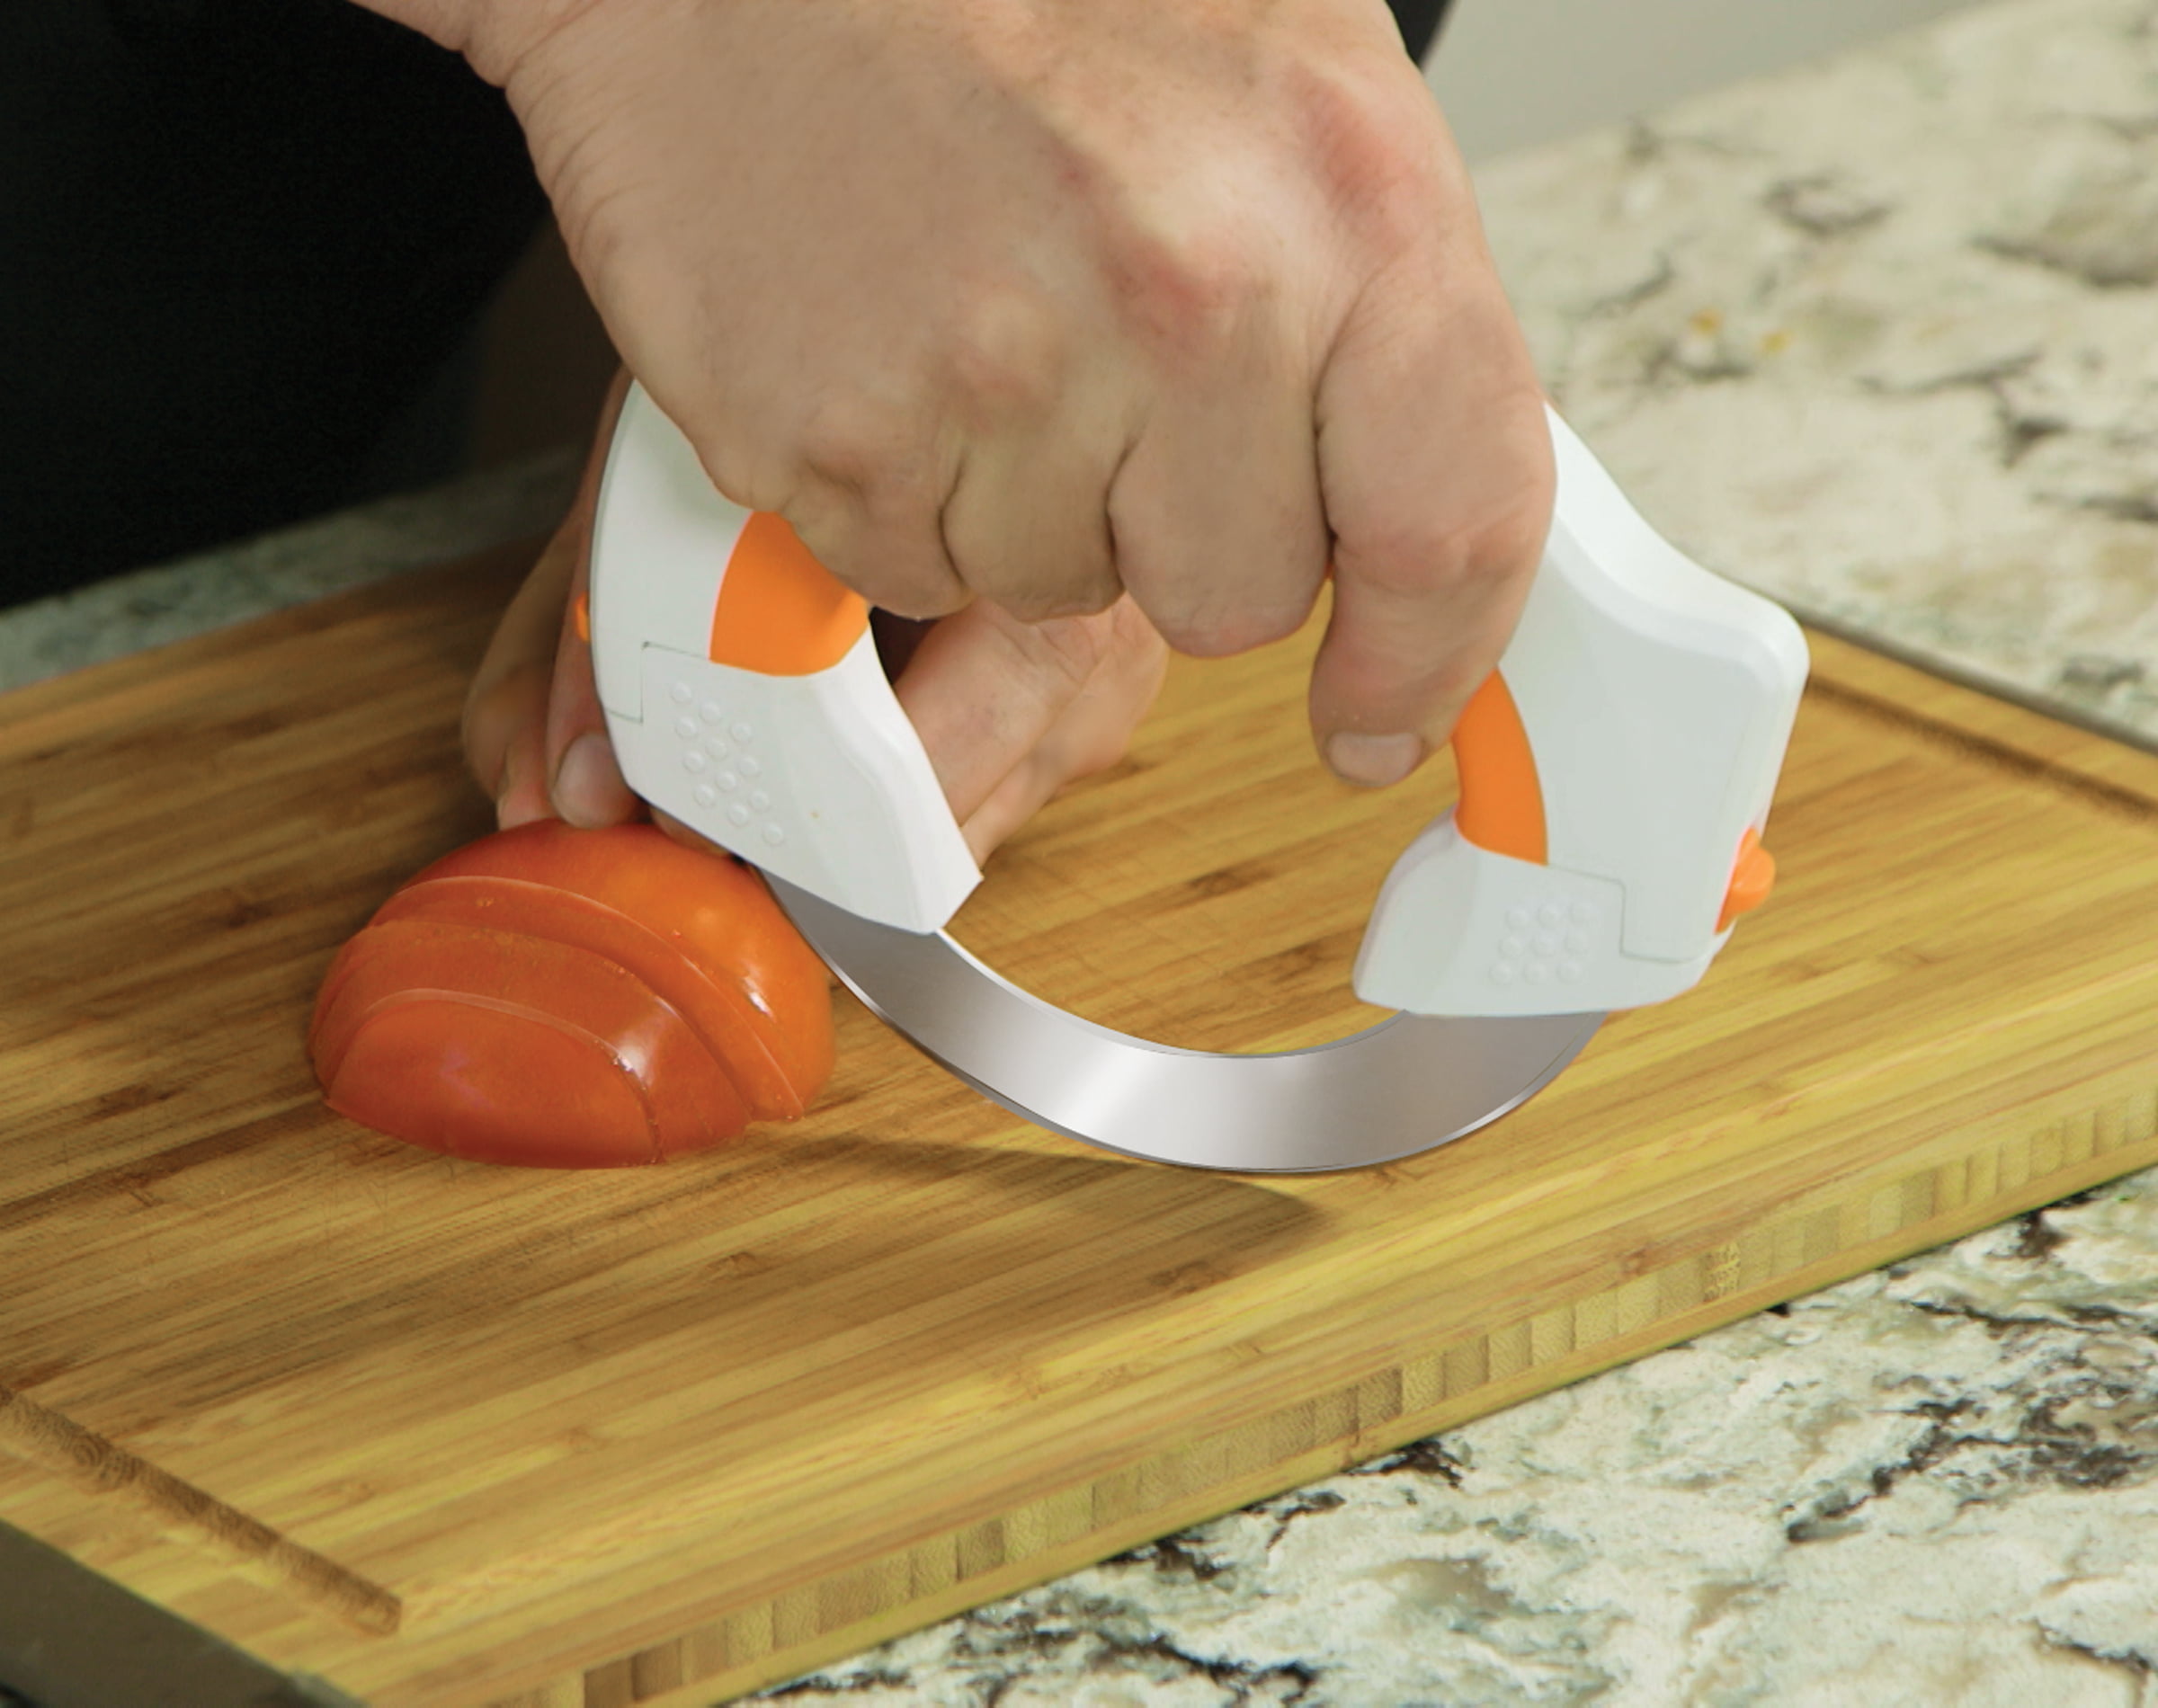 360 Rolling Knife Cutter For Speedy Slicing - Inspire Uplift